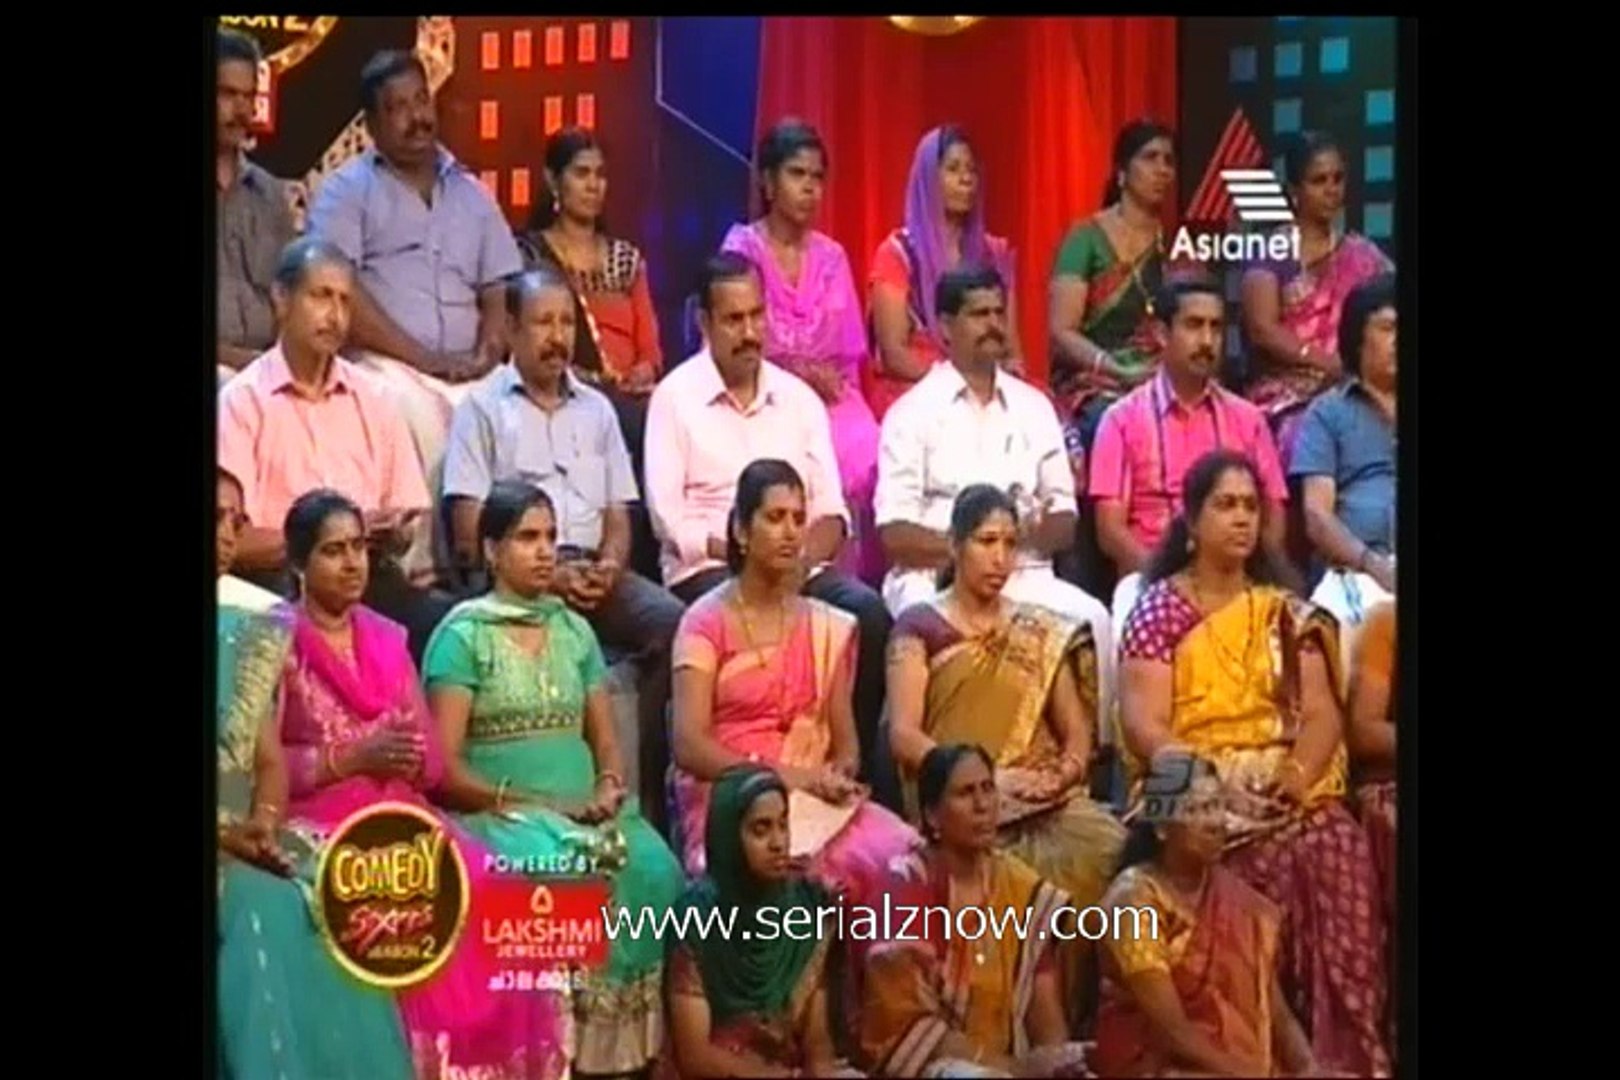 bev brooks recommends Asianet Vodafone Comedy Show